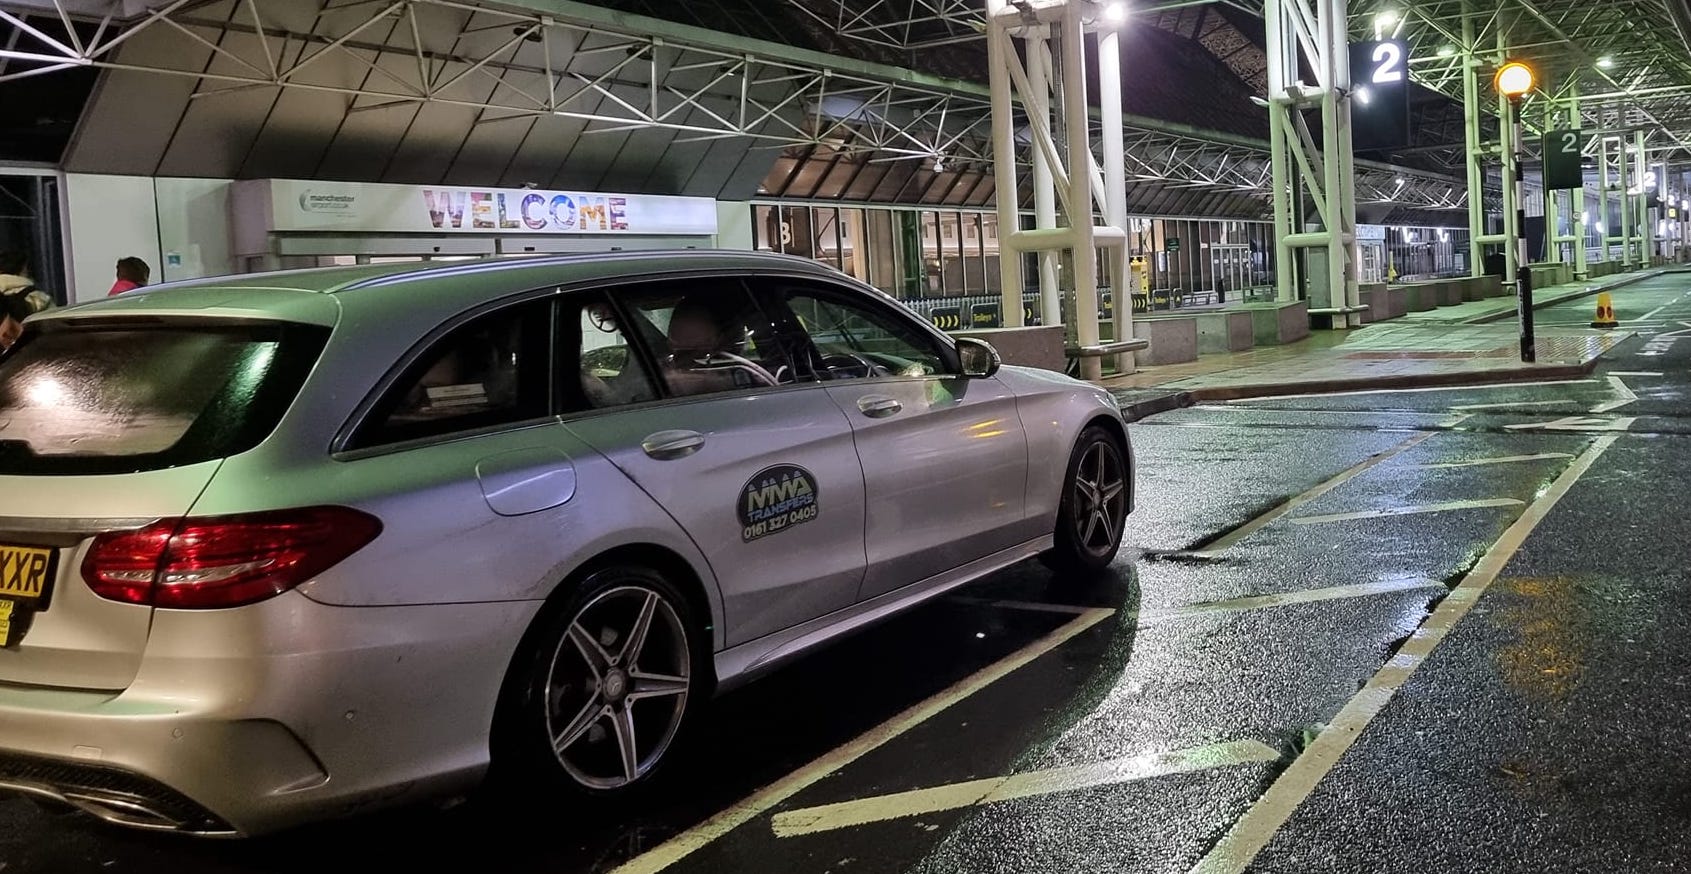 Take a Taxi from Manchester Airport to Bolton with a free Meet and Greet Service